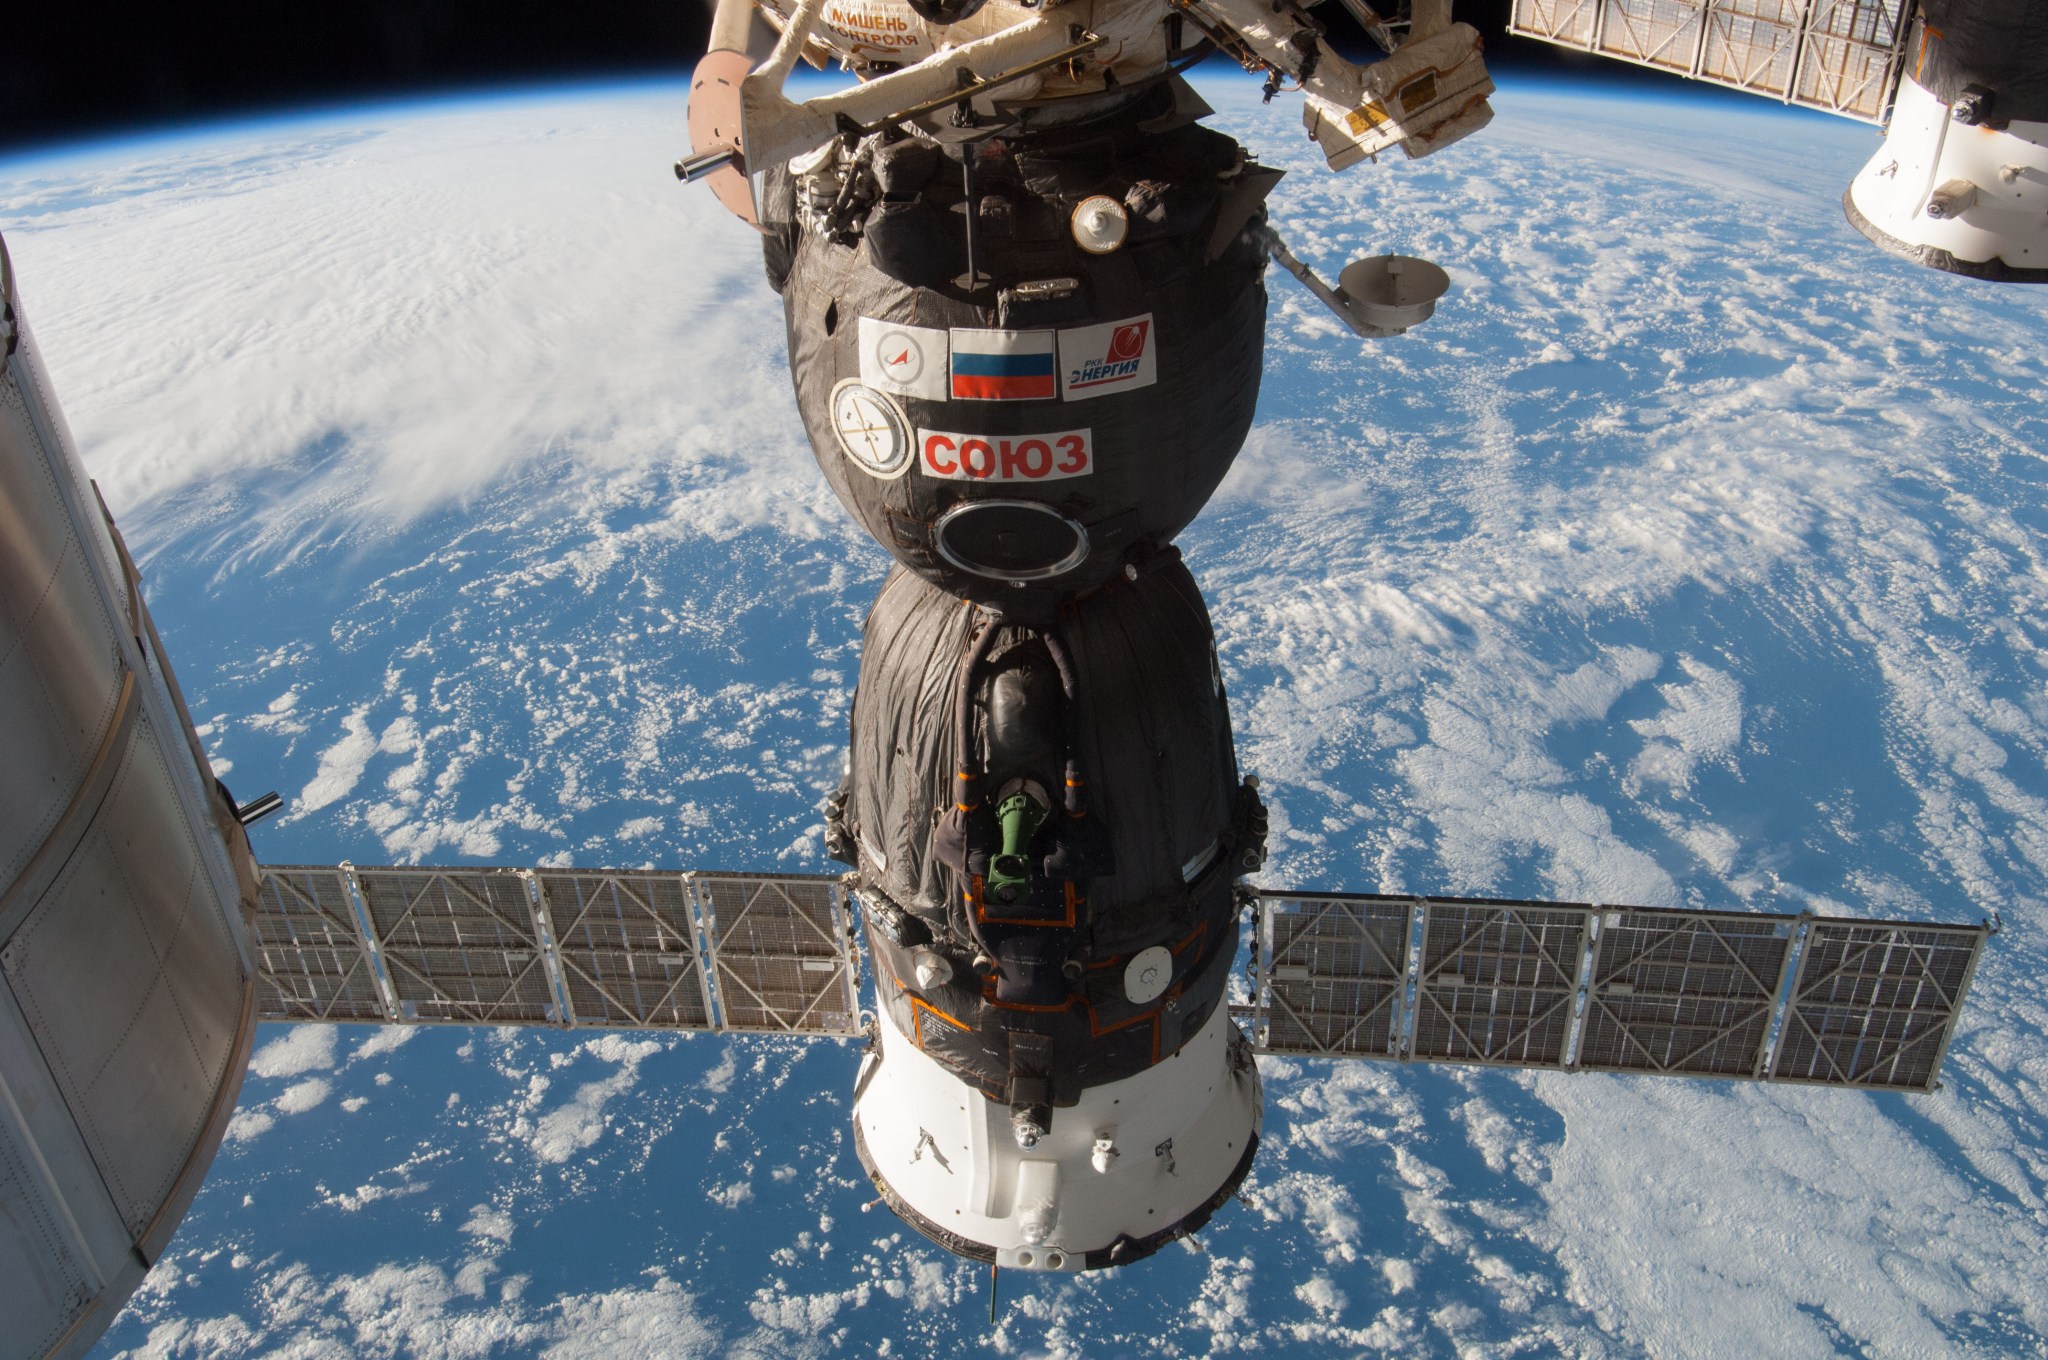 Soyuz spacecraft attached to the space station above Earth